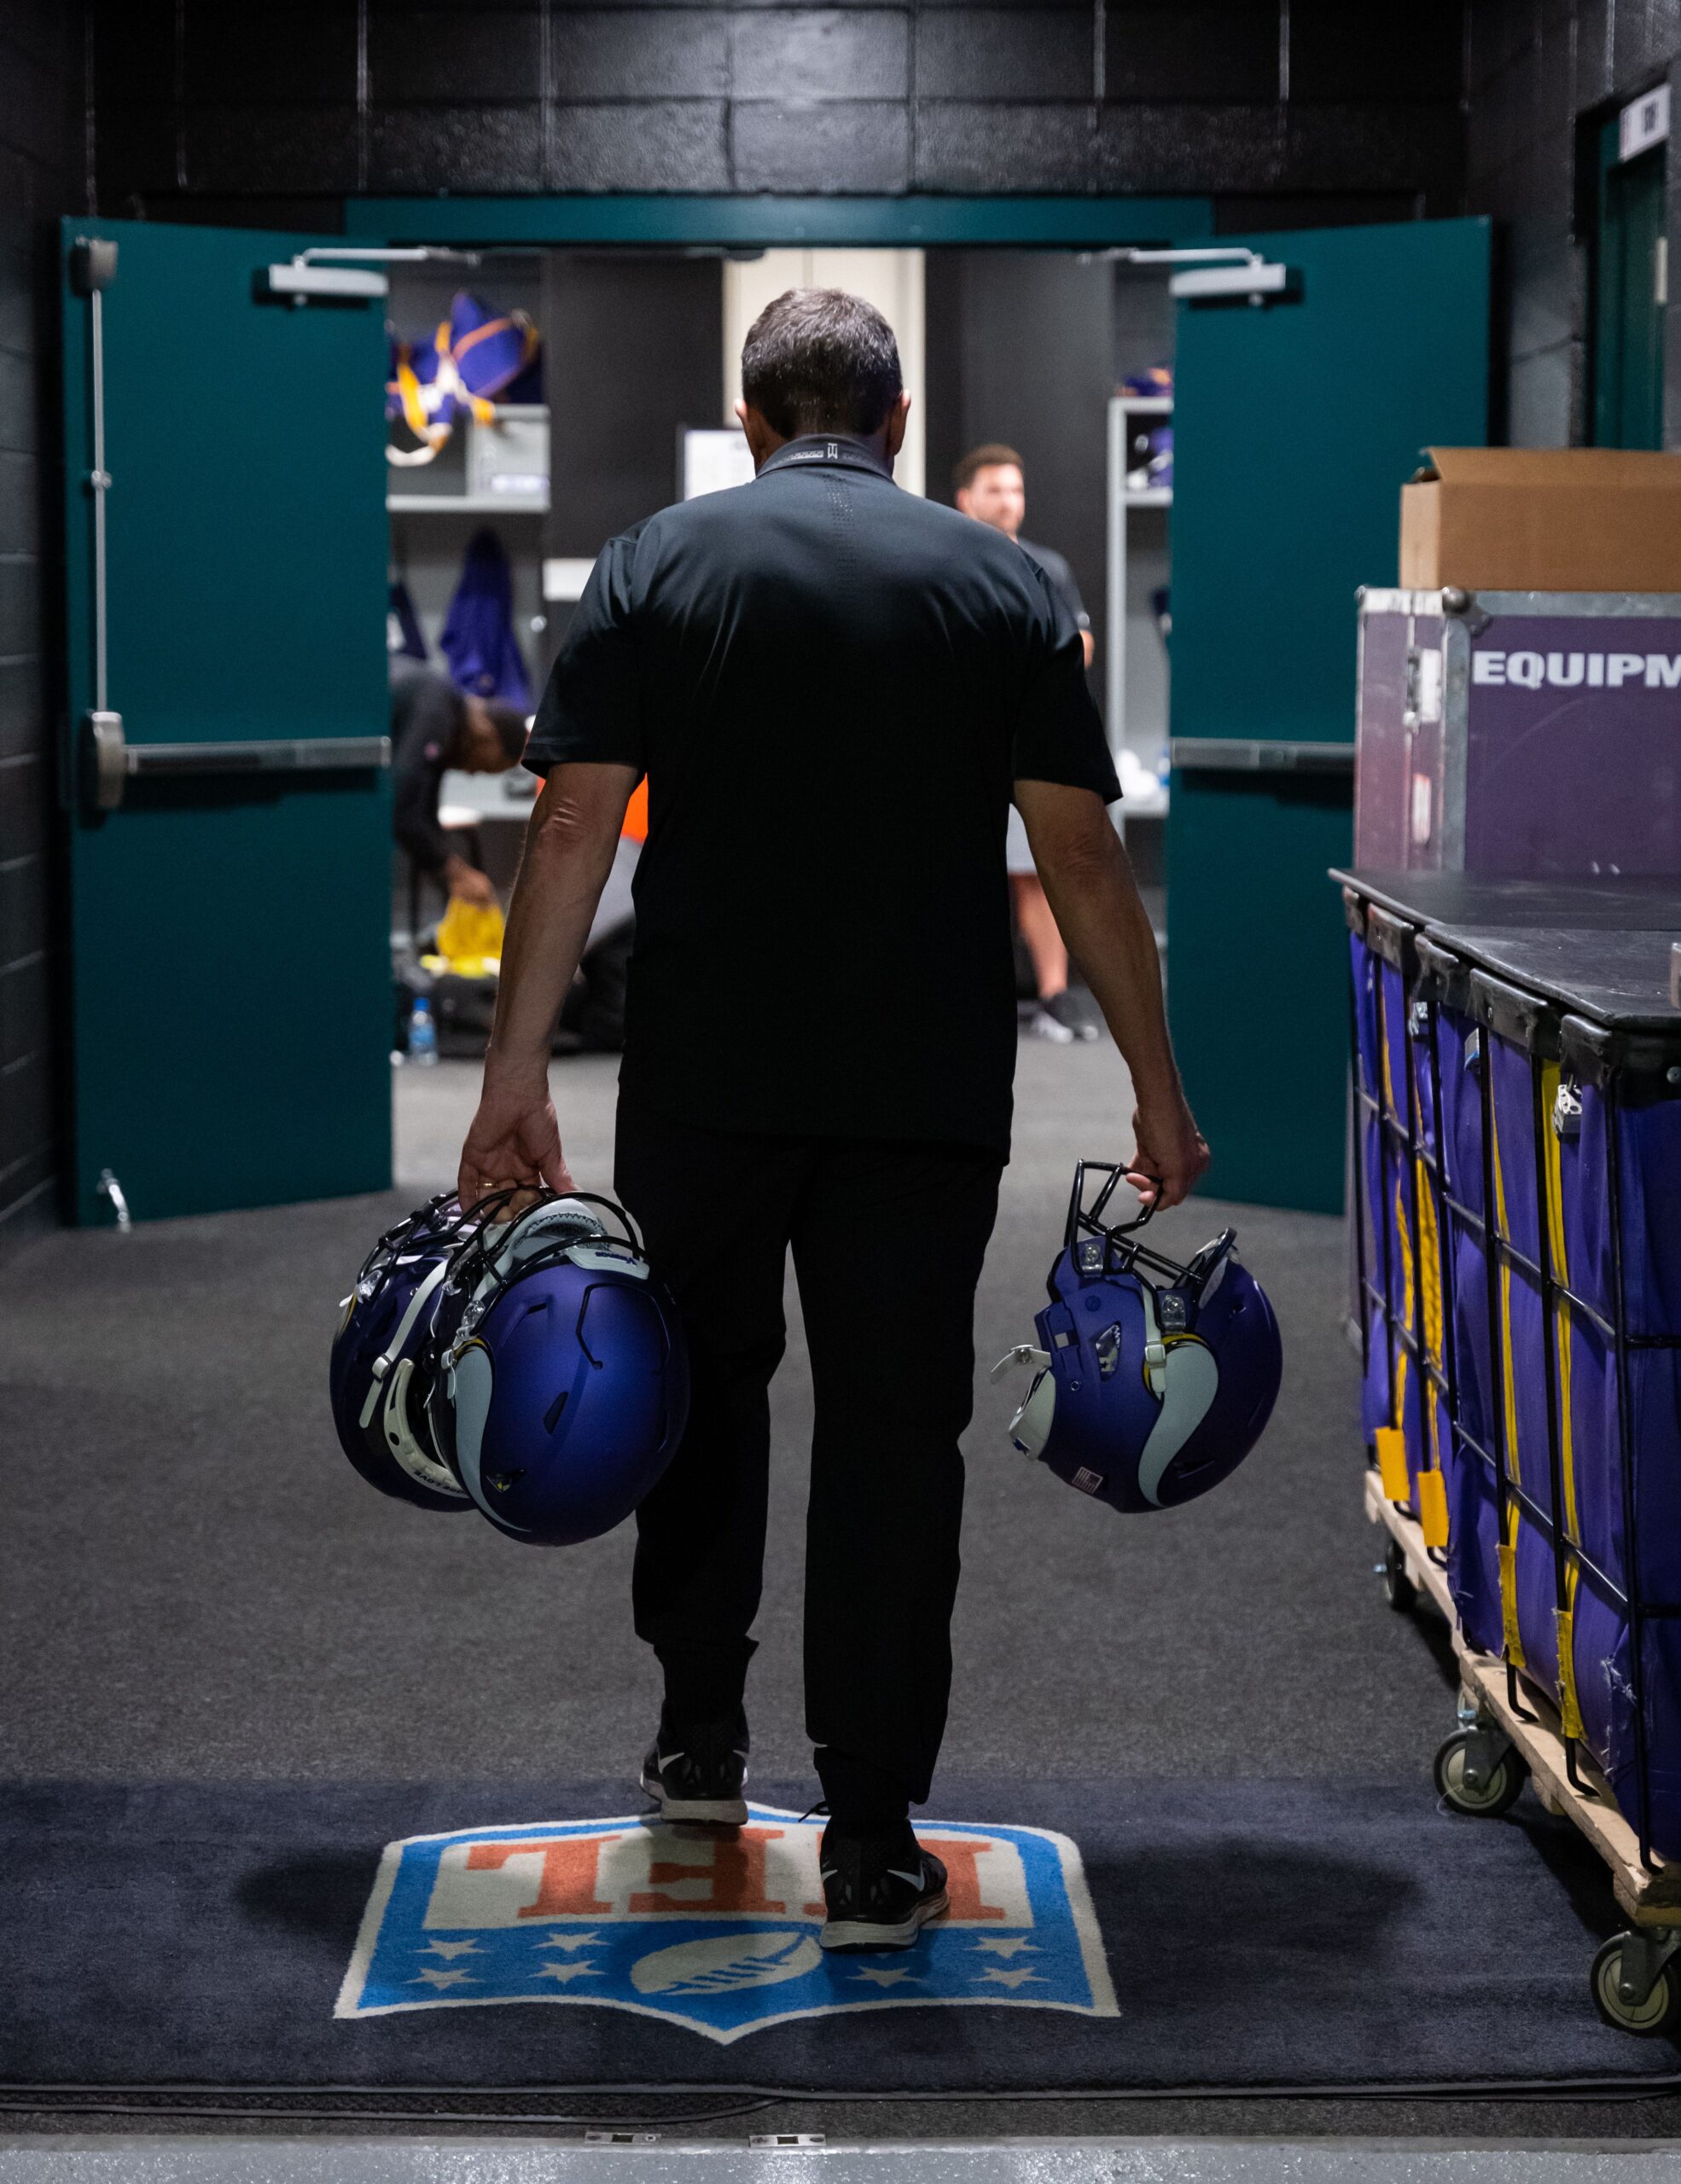 Longtime Vikings equipment manager retires after 47 years